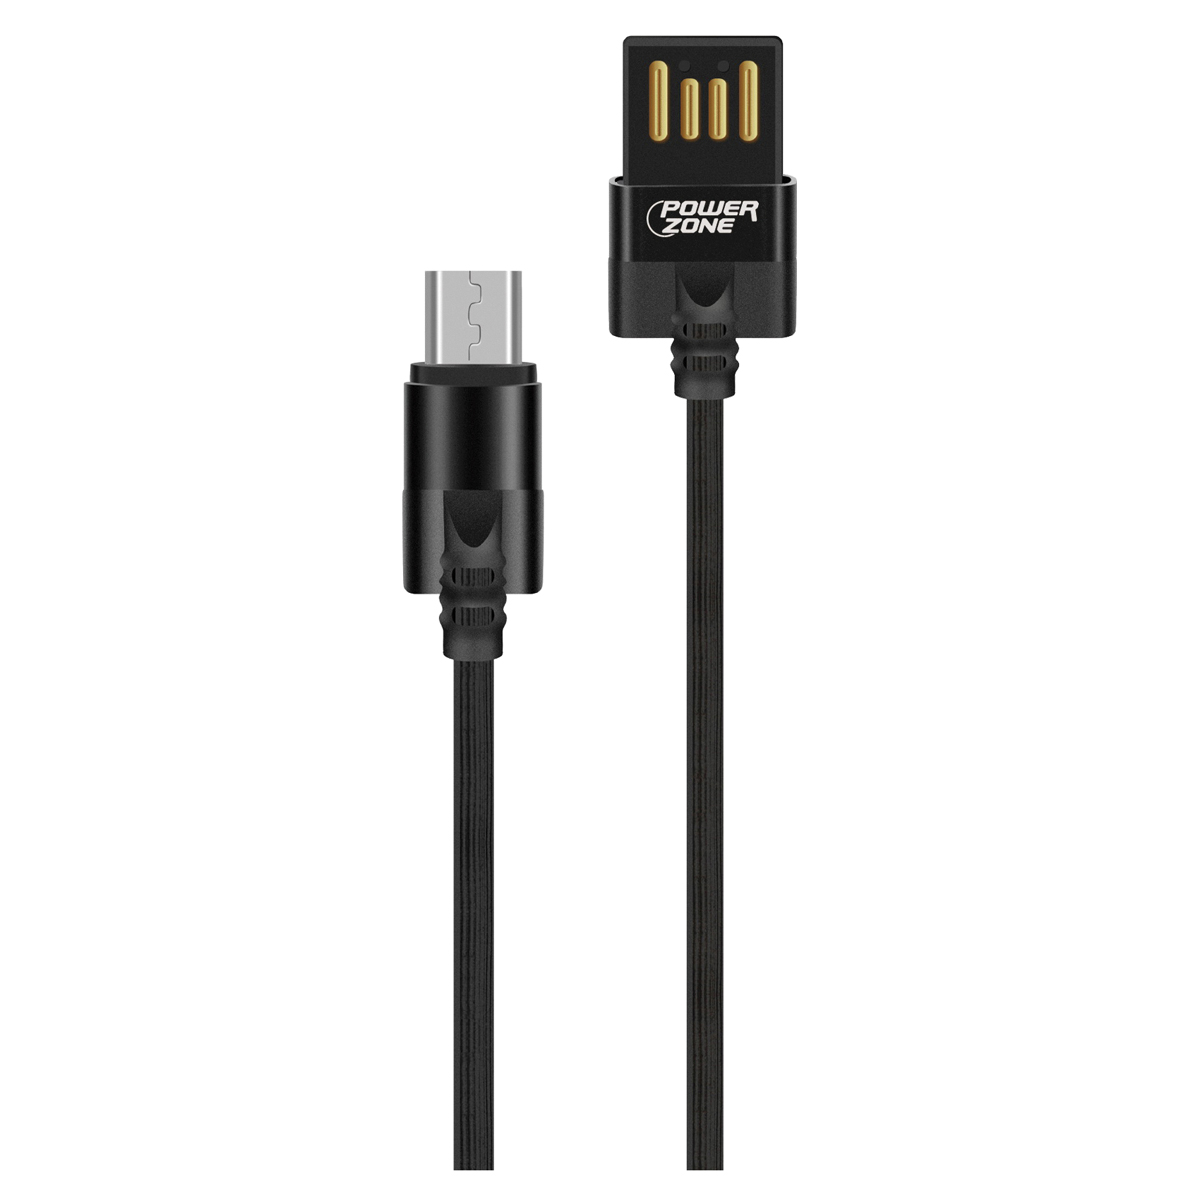 T56-MICRO Micro Charging Cable, PVC, Black, 3 ft L